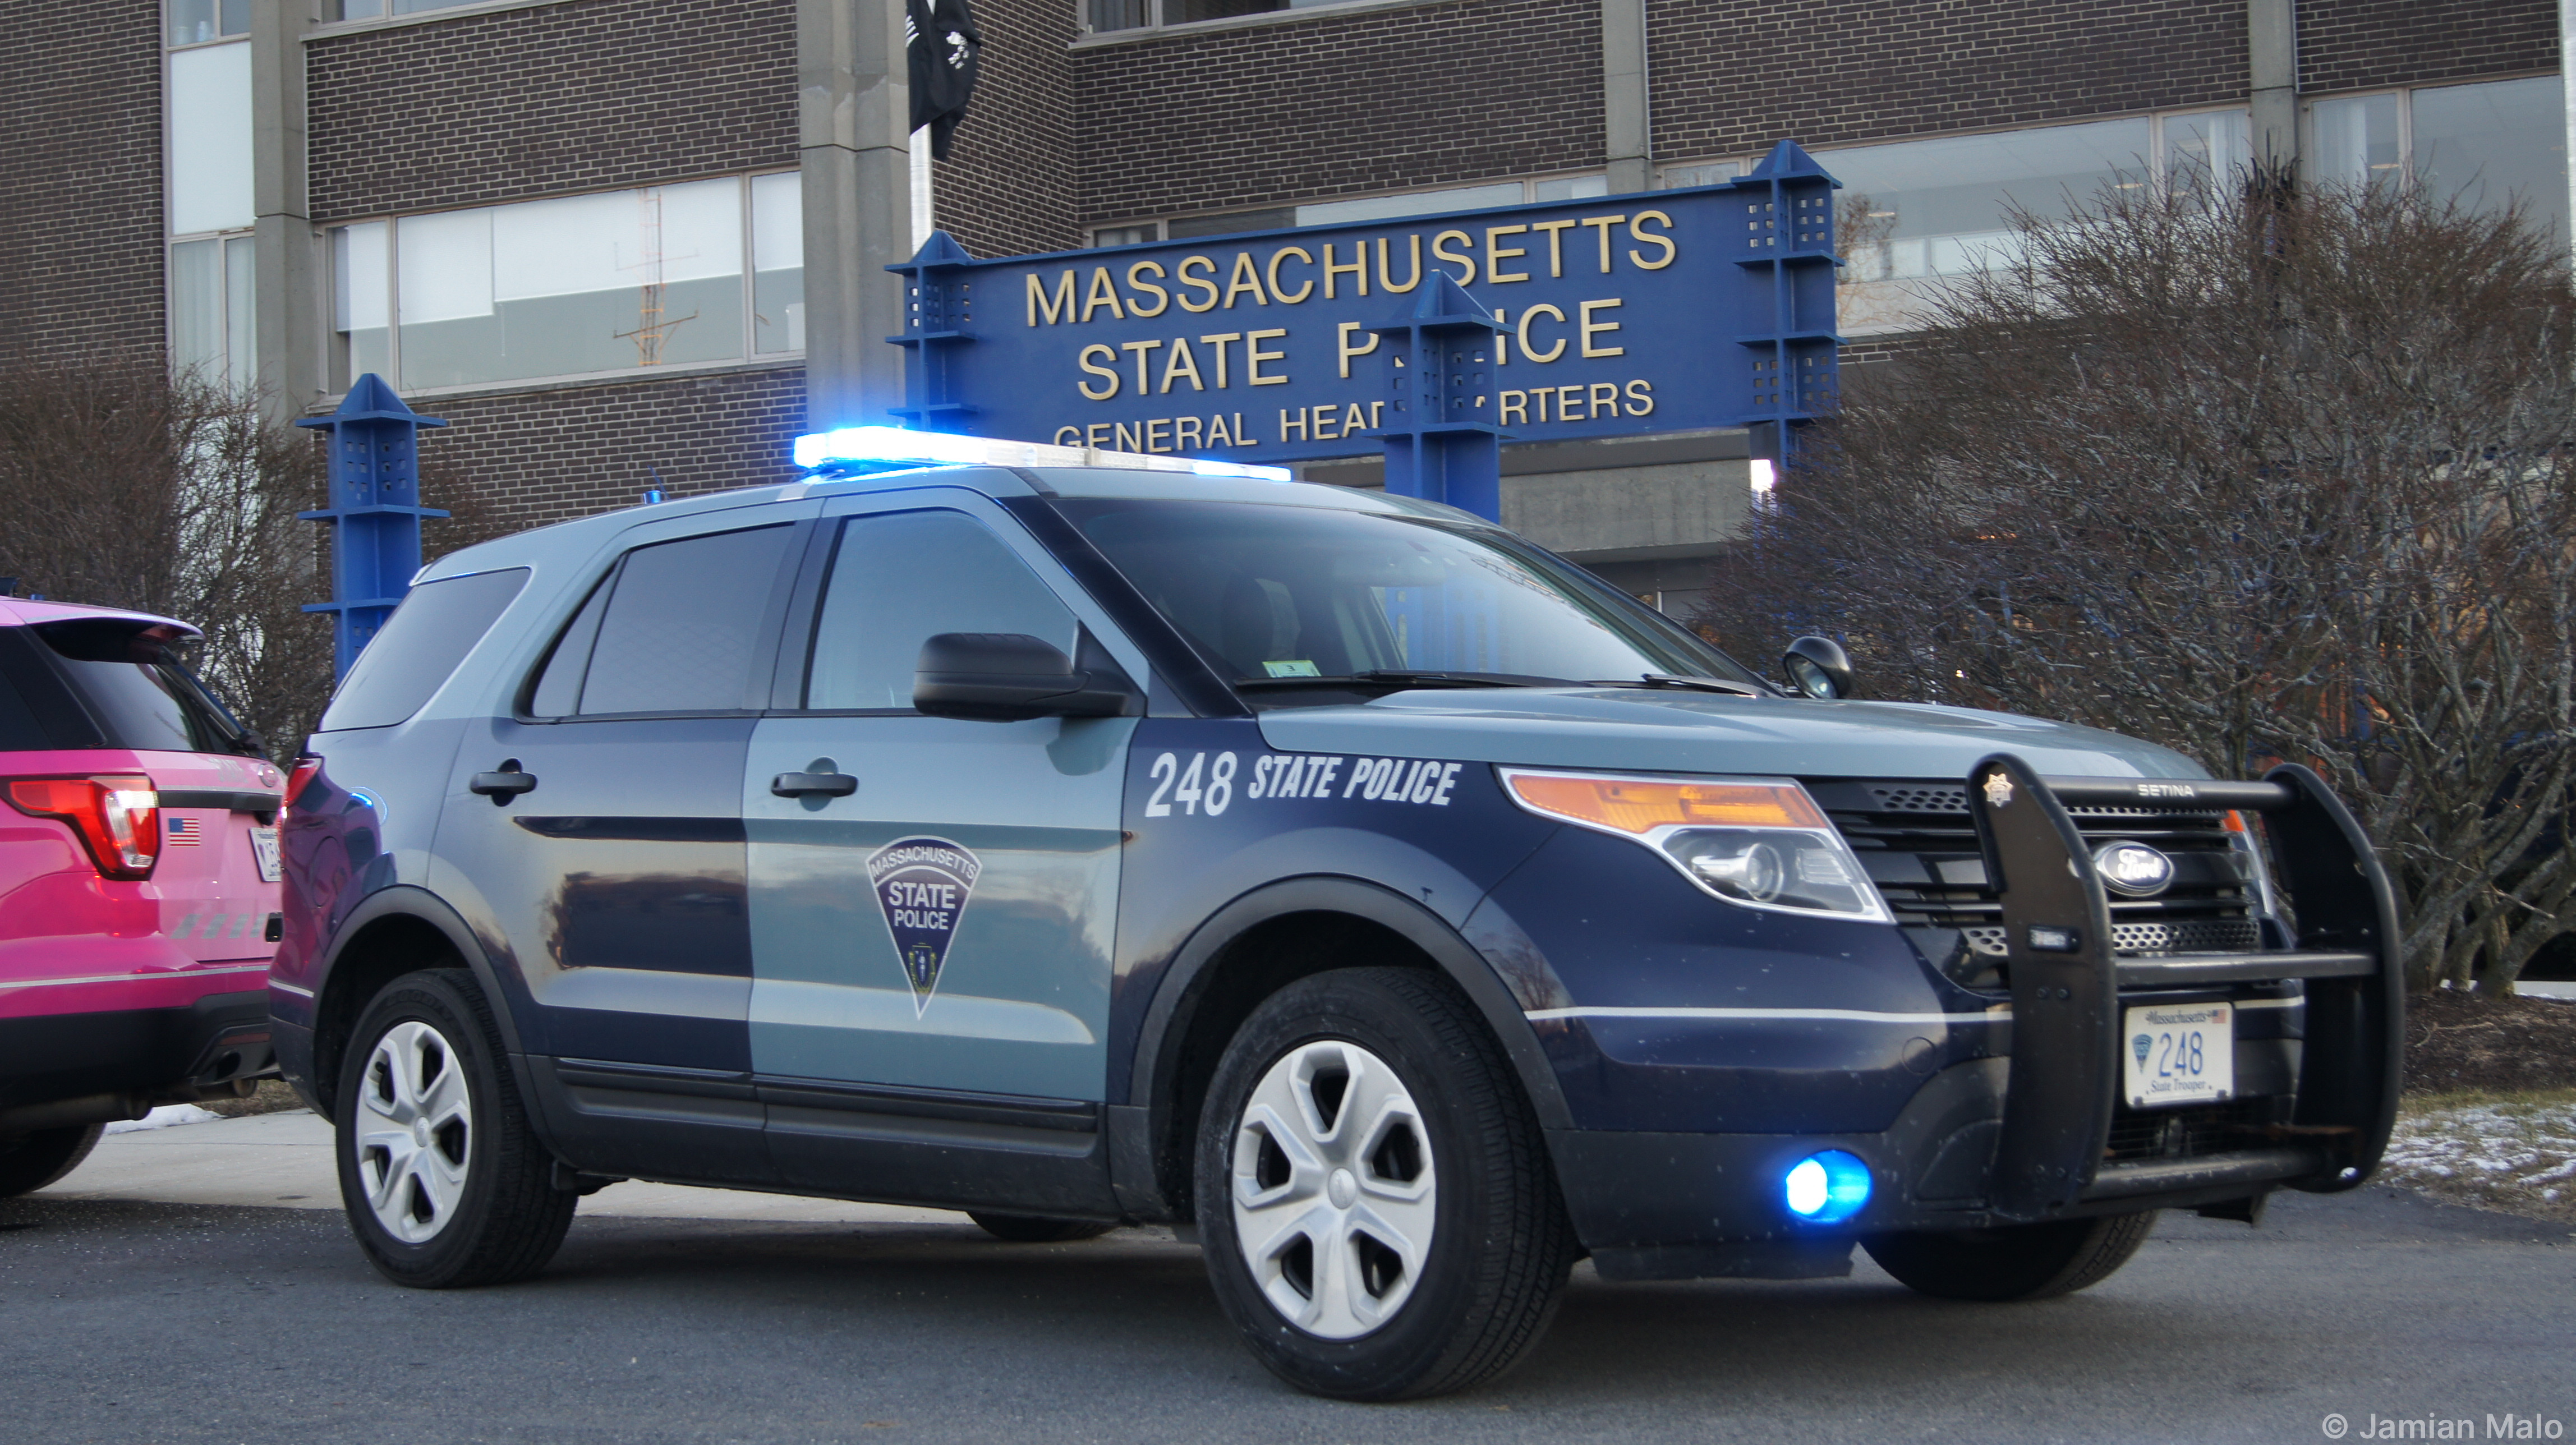 A photo  of Massachusetts State Police
            Cruiser 248, a 2015 Ford Police Interceptor Utility             taken by Jamian Malo